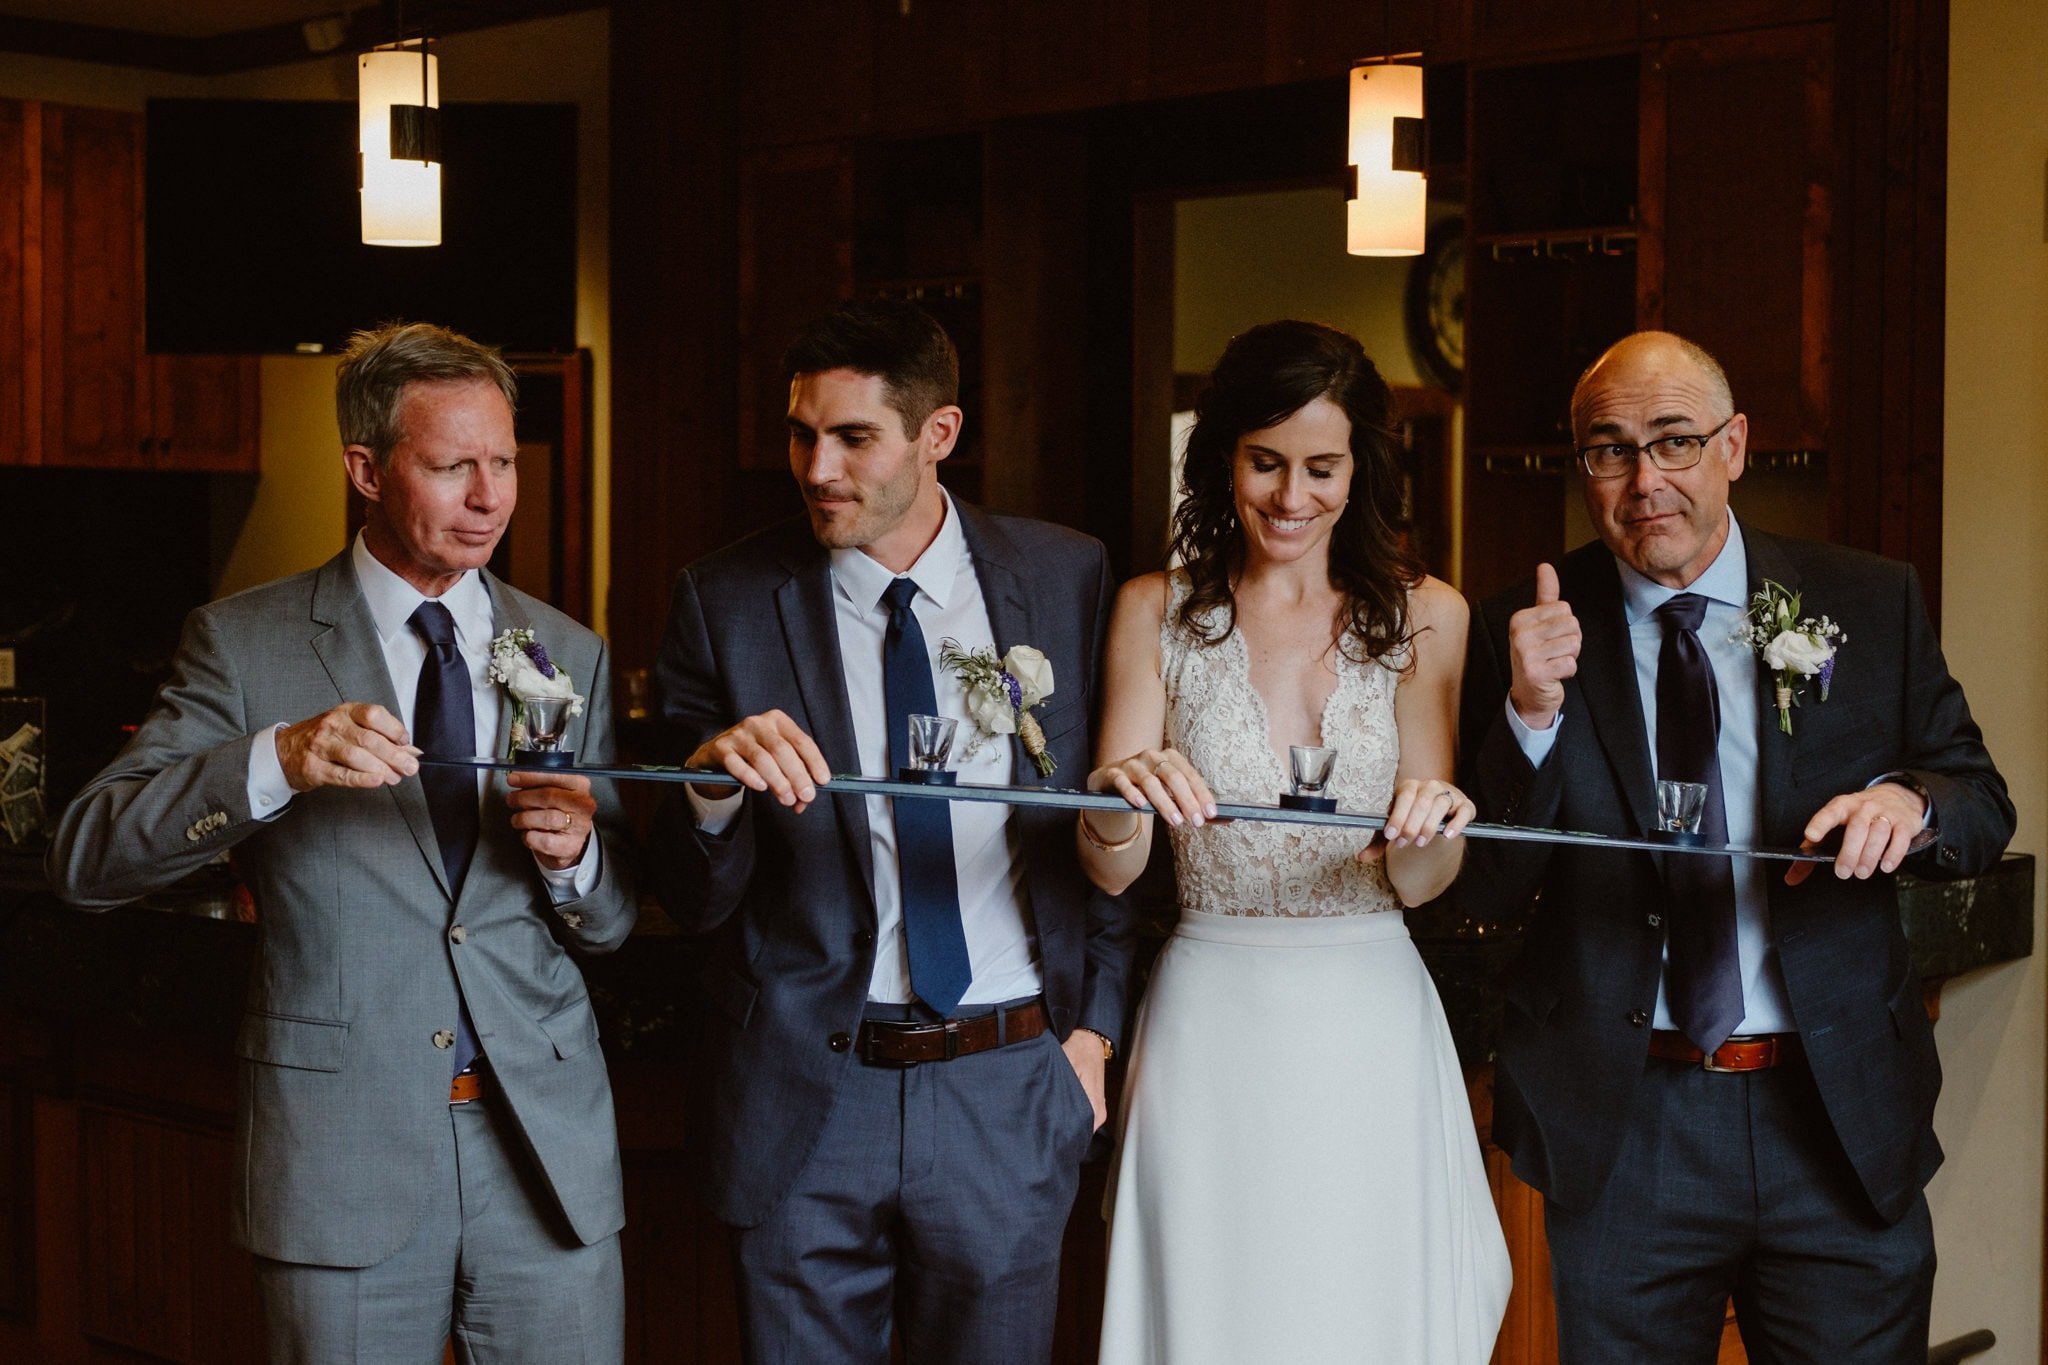 Bride and groom do shotski that says "Our adventure begins" with their dads at Breckenridge wedding, Colorado wedding photographer